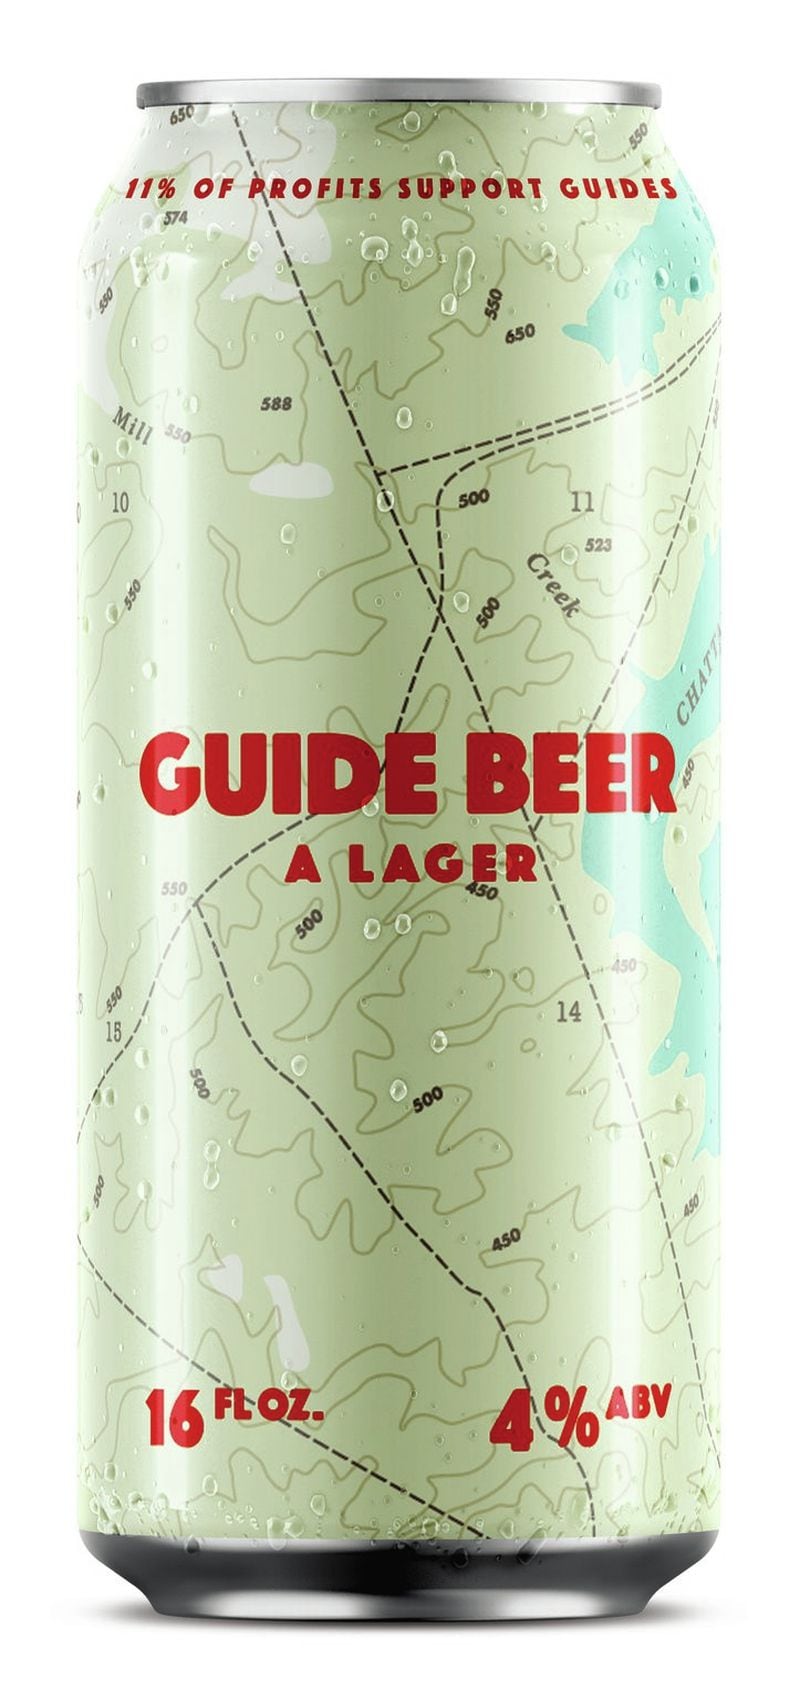 SweetWater developed Guide Beer A Lager as a beer “for the great outdoors.” CONTRIBUTED BY SWEETWATER BREWING CO.